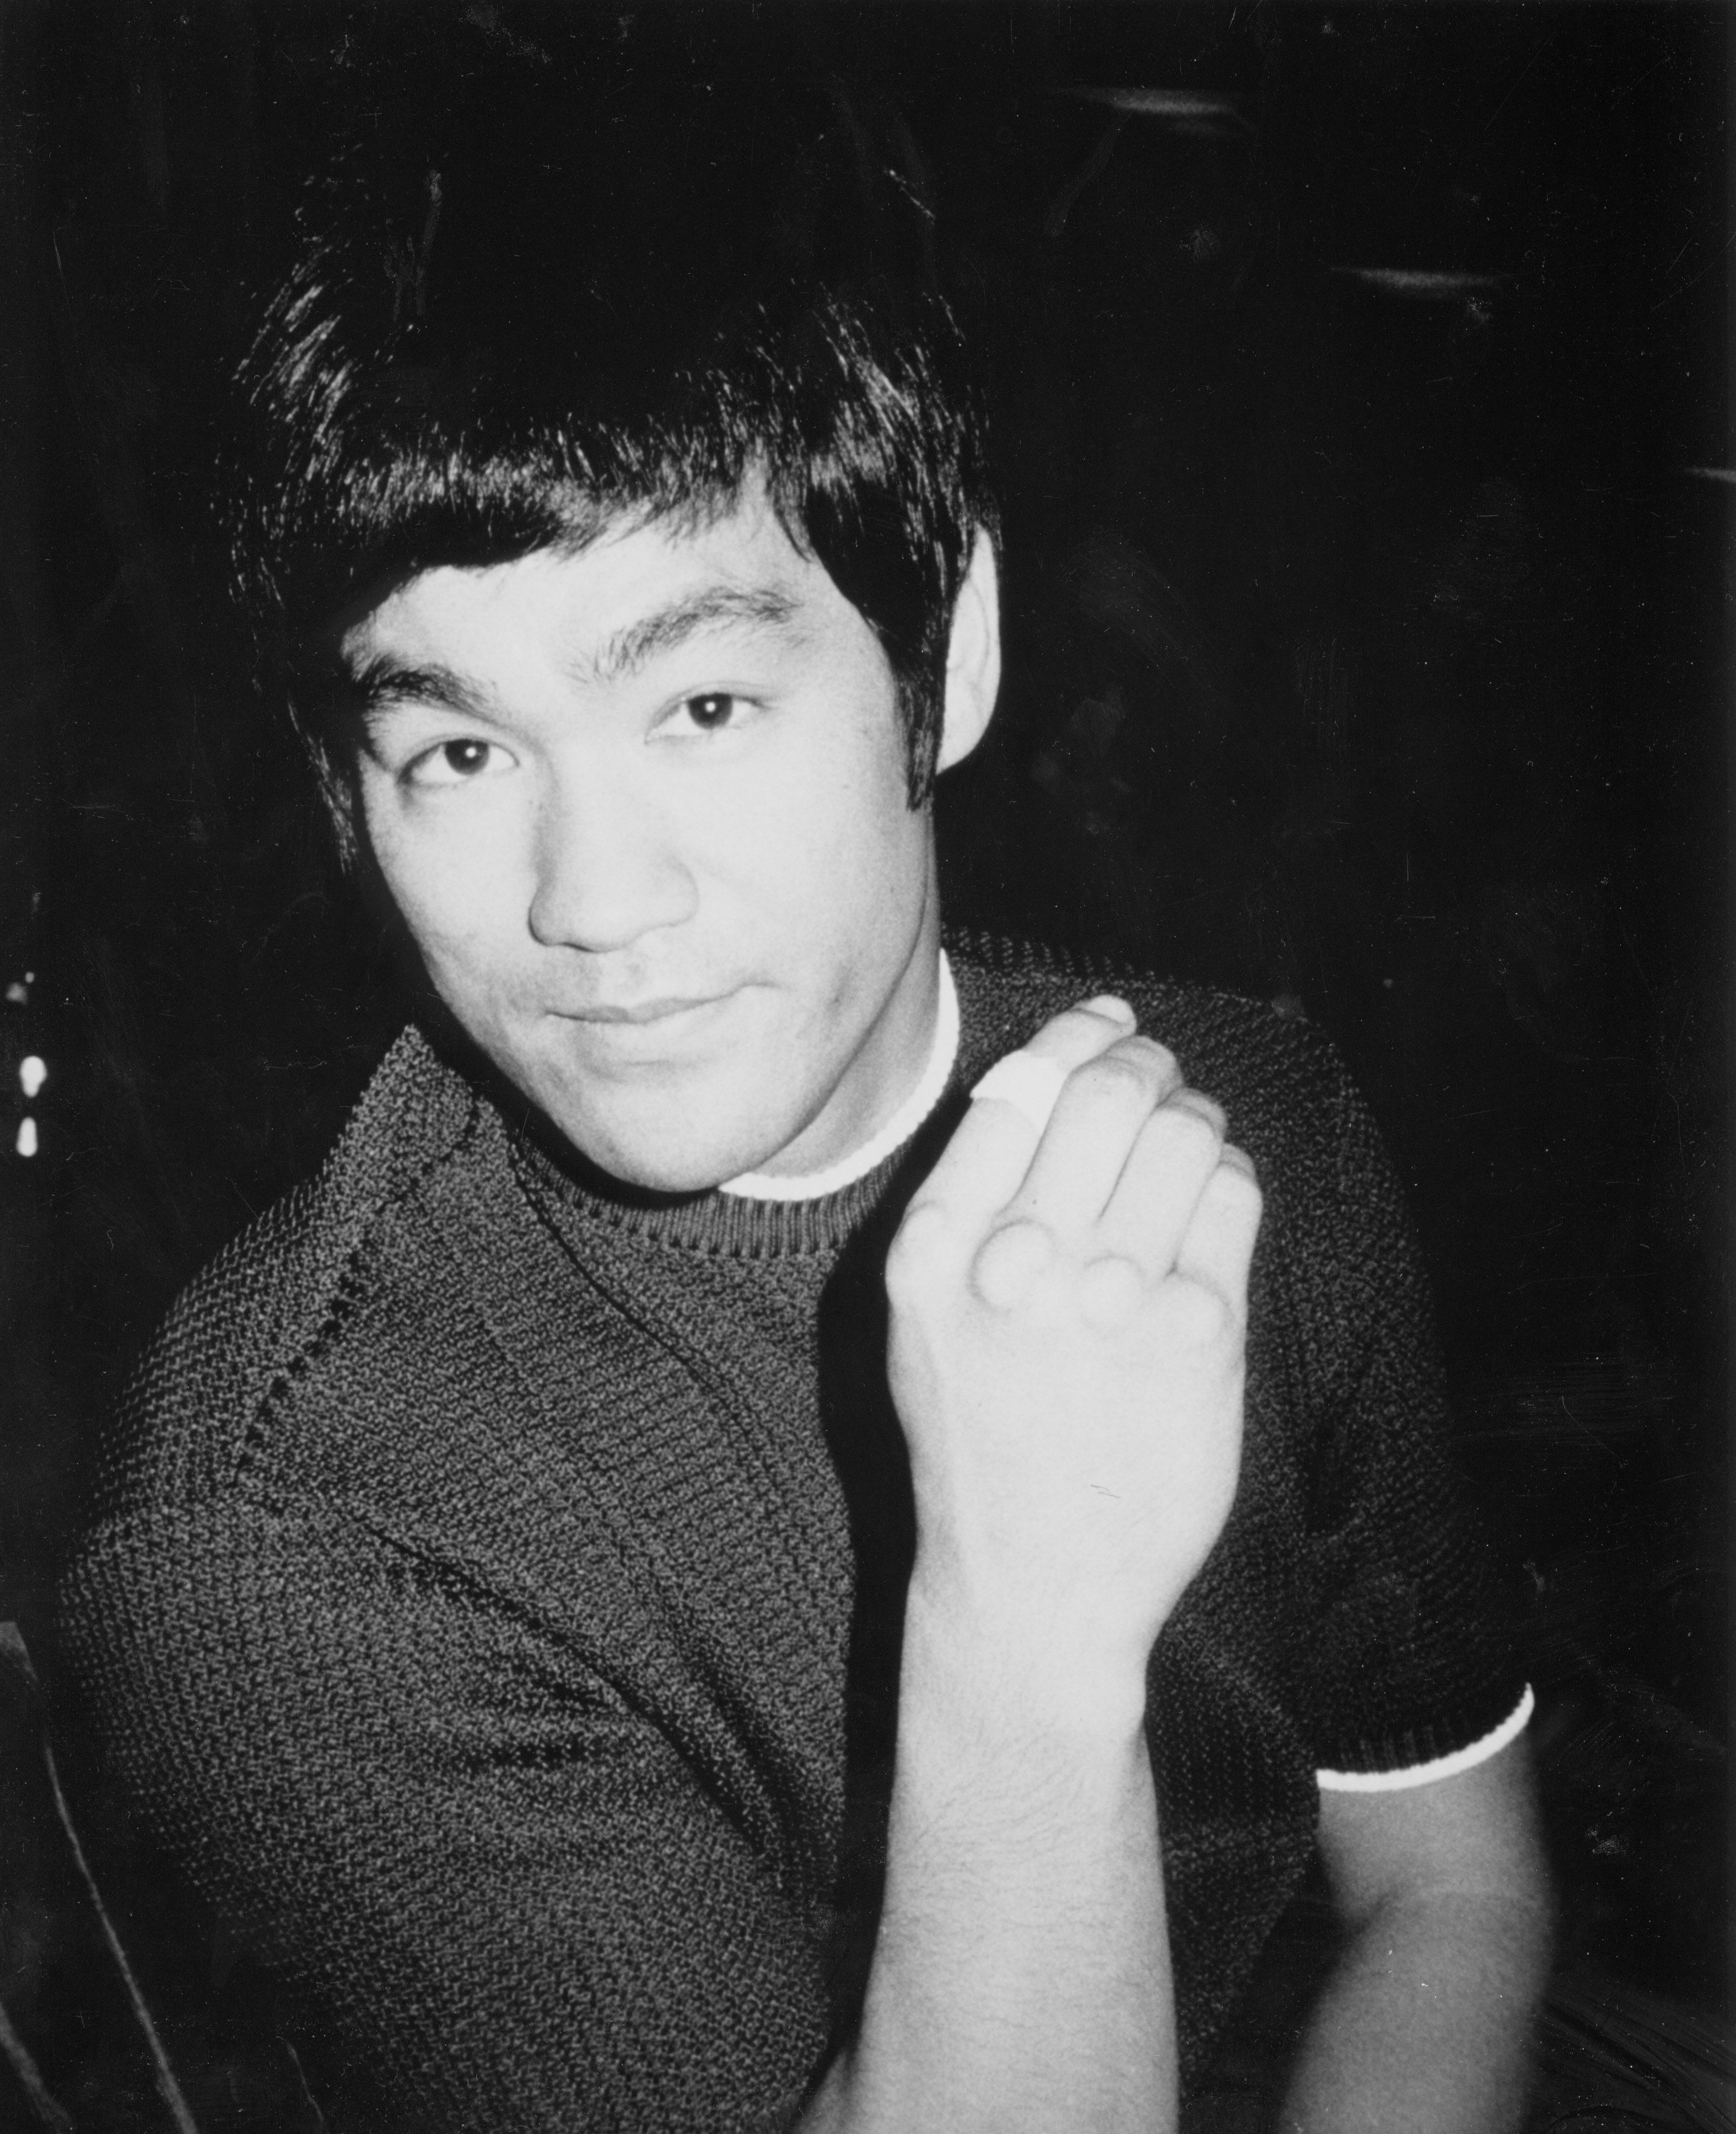 Bruce Lee's Daughter Shannon Lee and Bao Nguyen Discuss 'Be Water' Doc